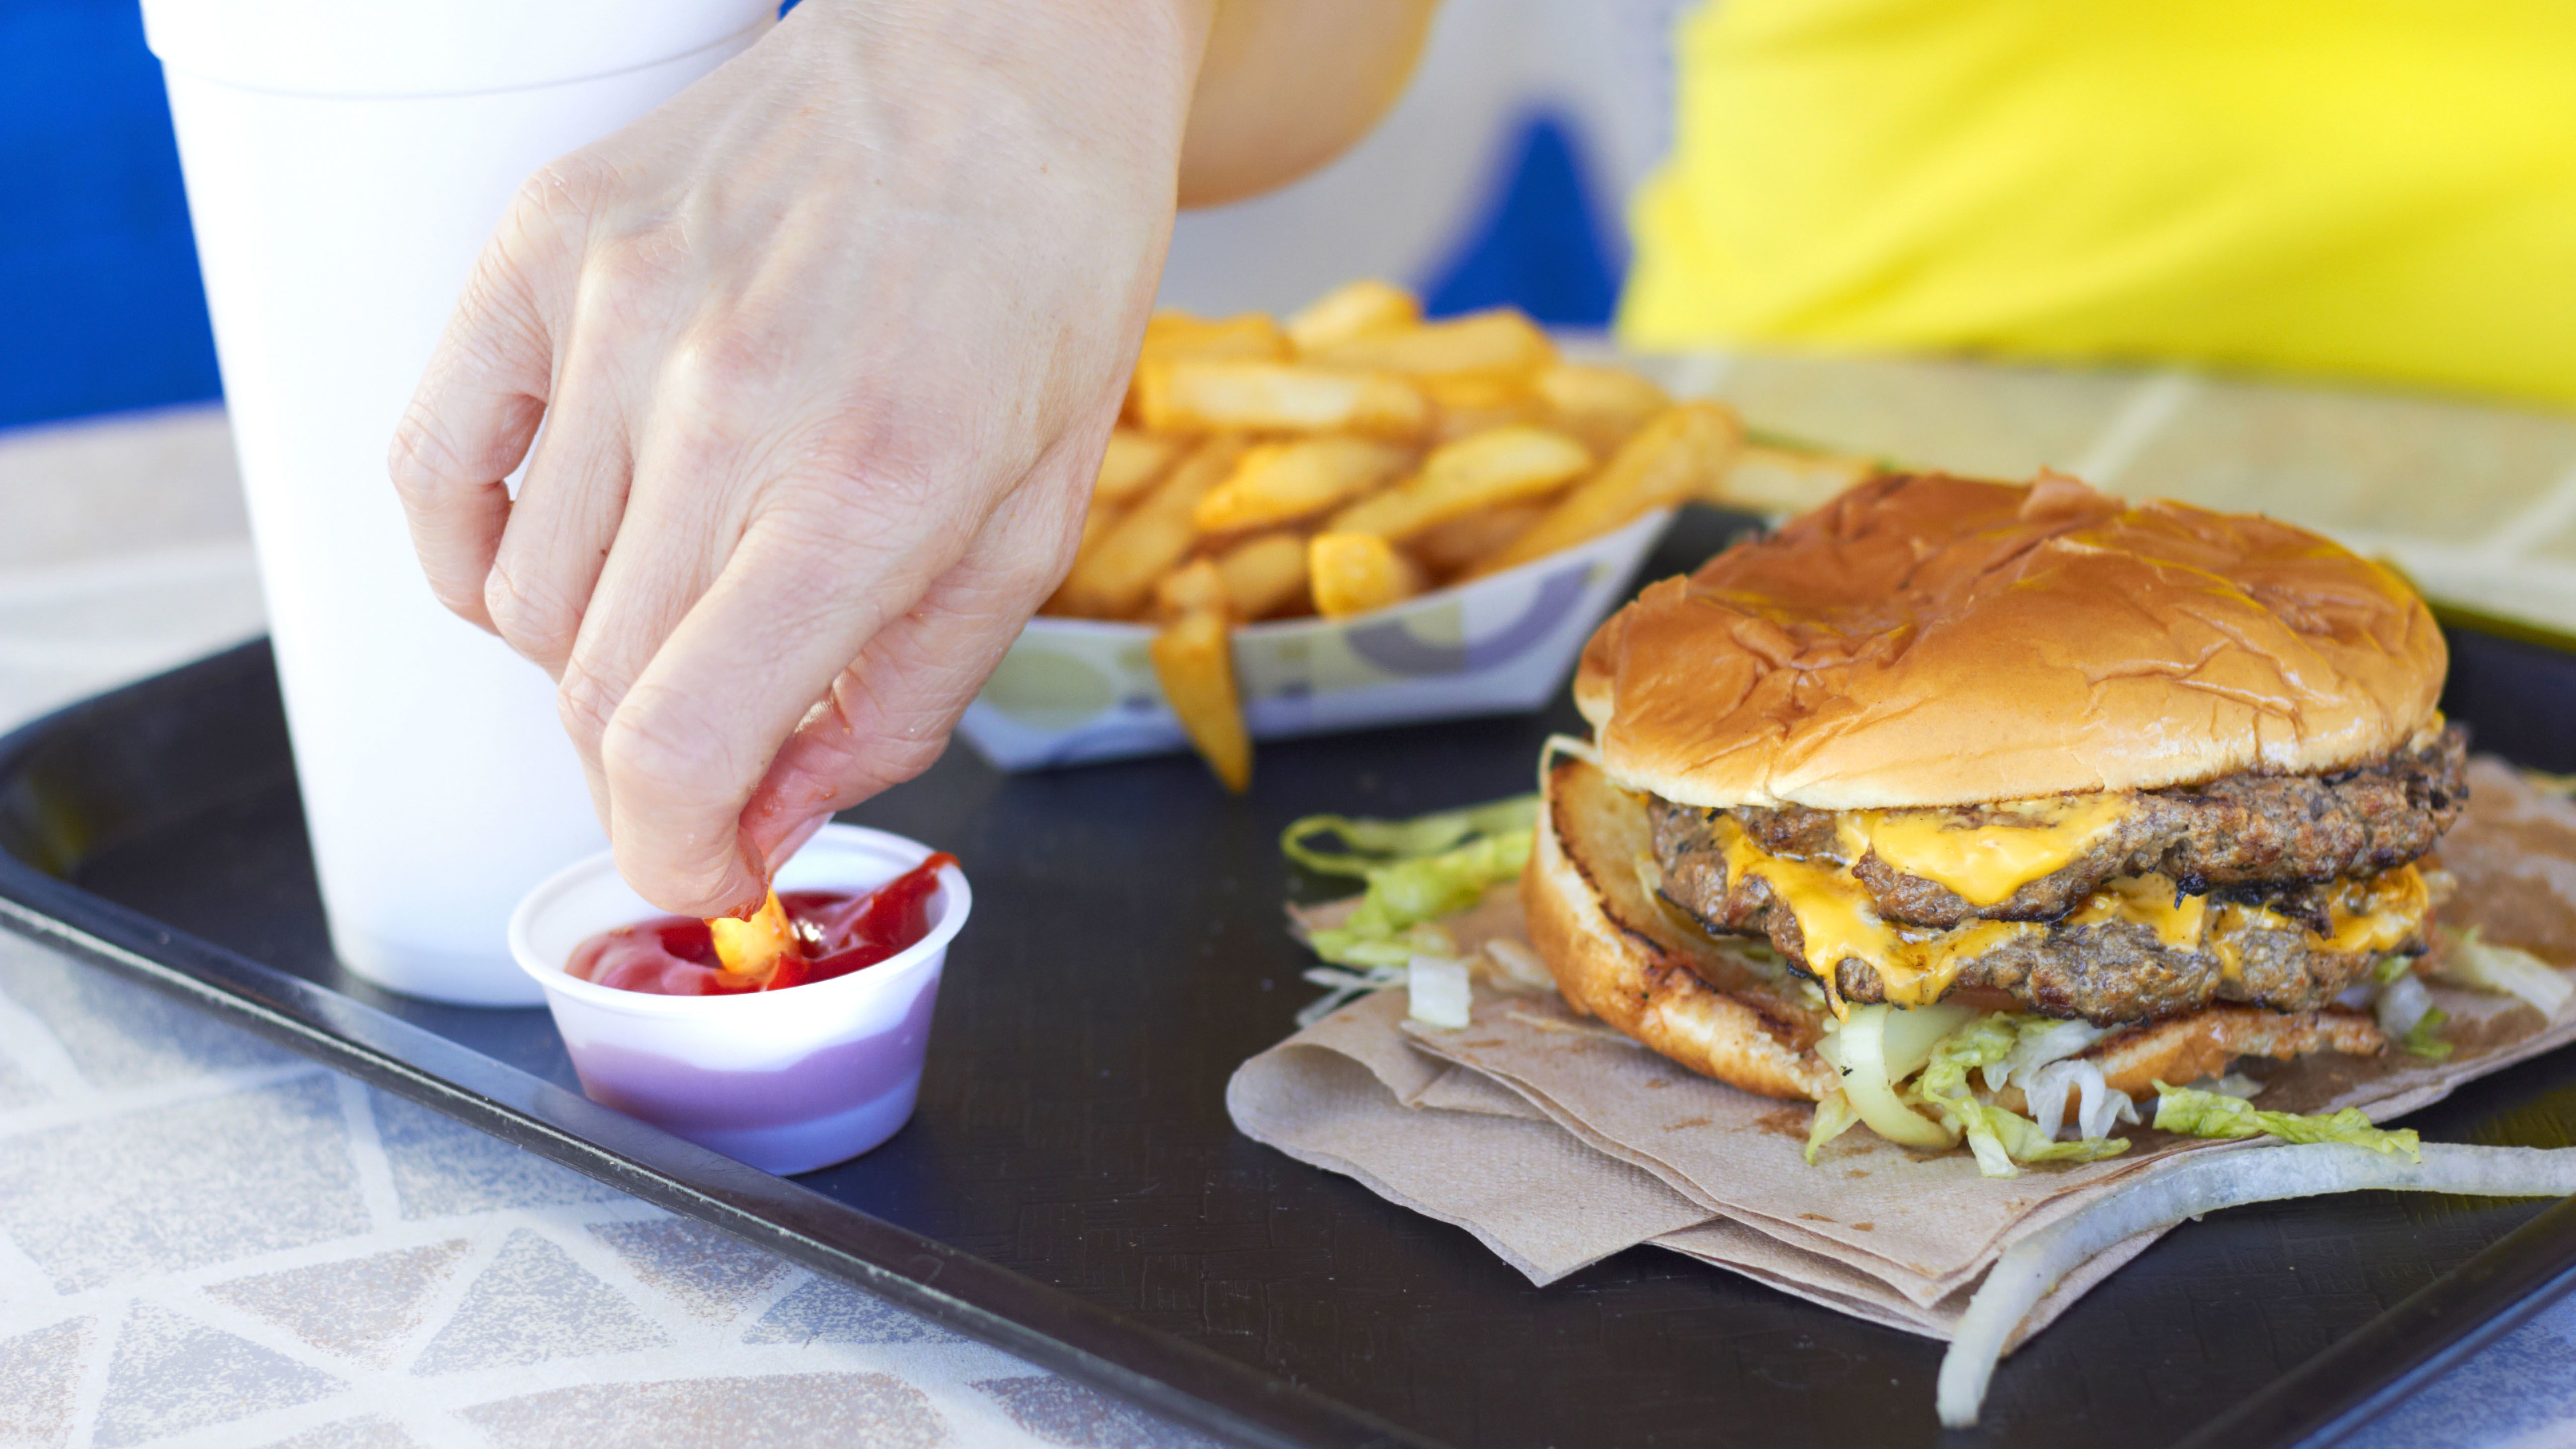 fast food and obesity research paper